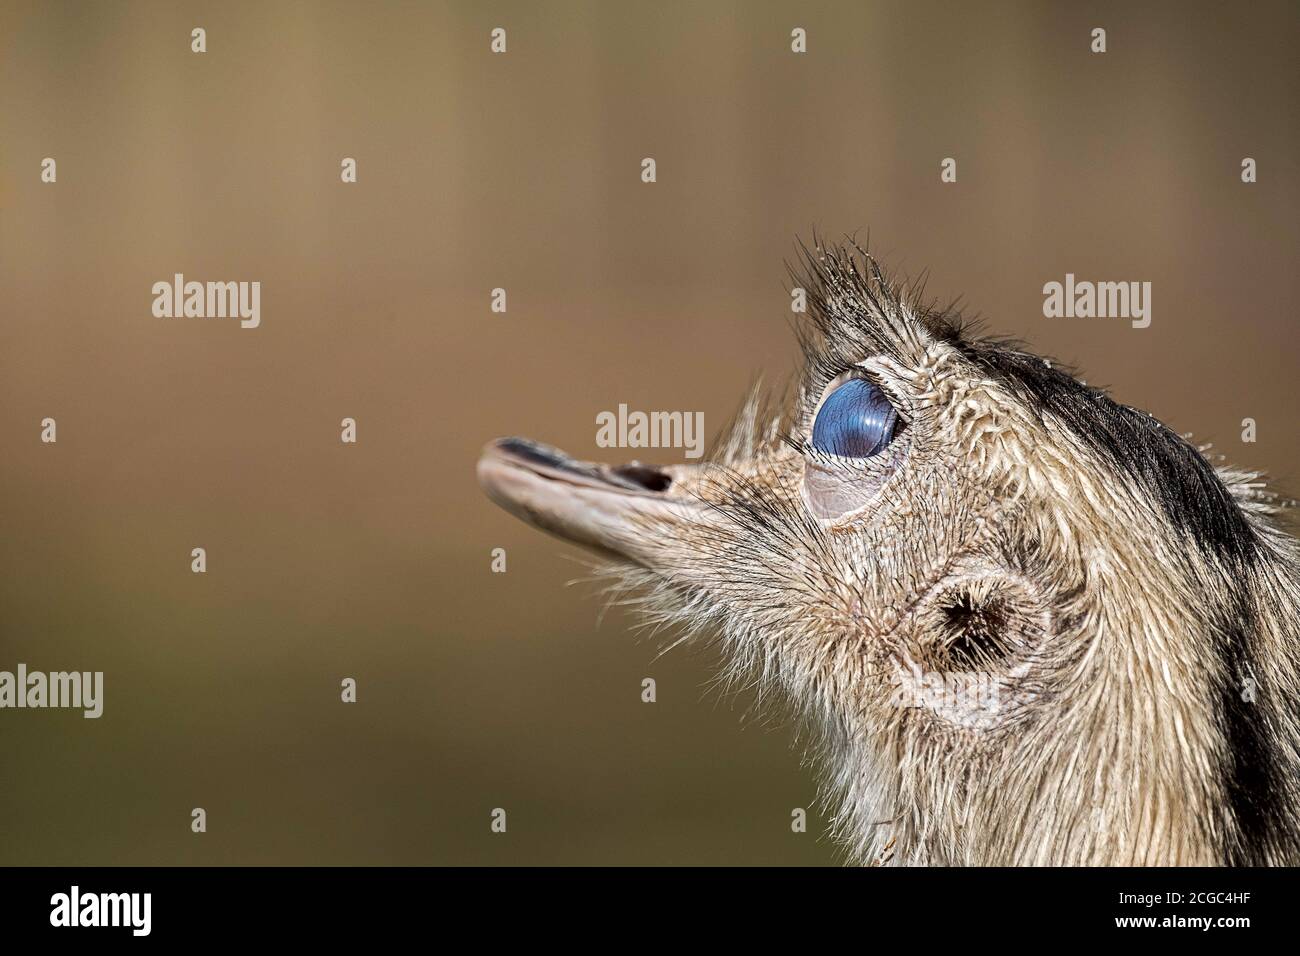 The nictitating membrane is a transparent  third eyelid which occur in some bird species, here a greater rhea Stock Photo